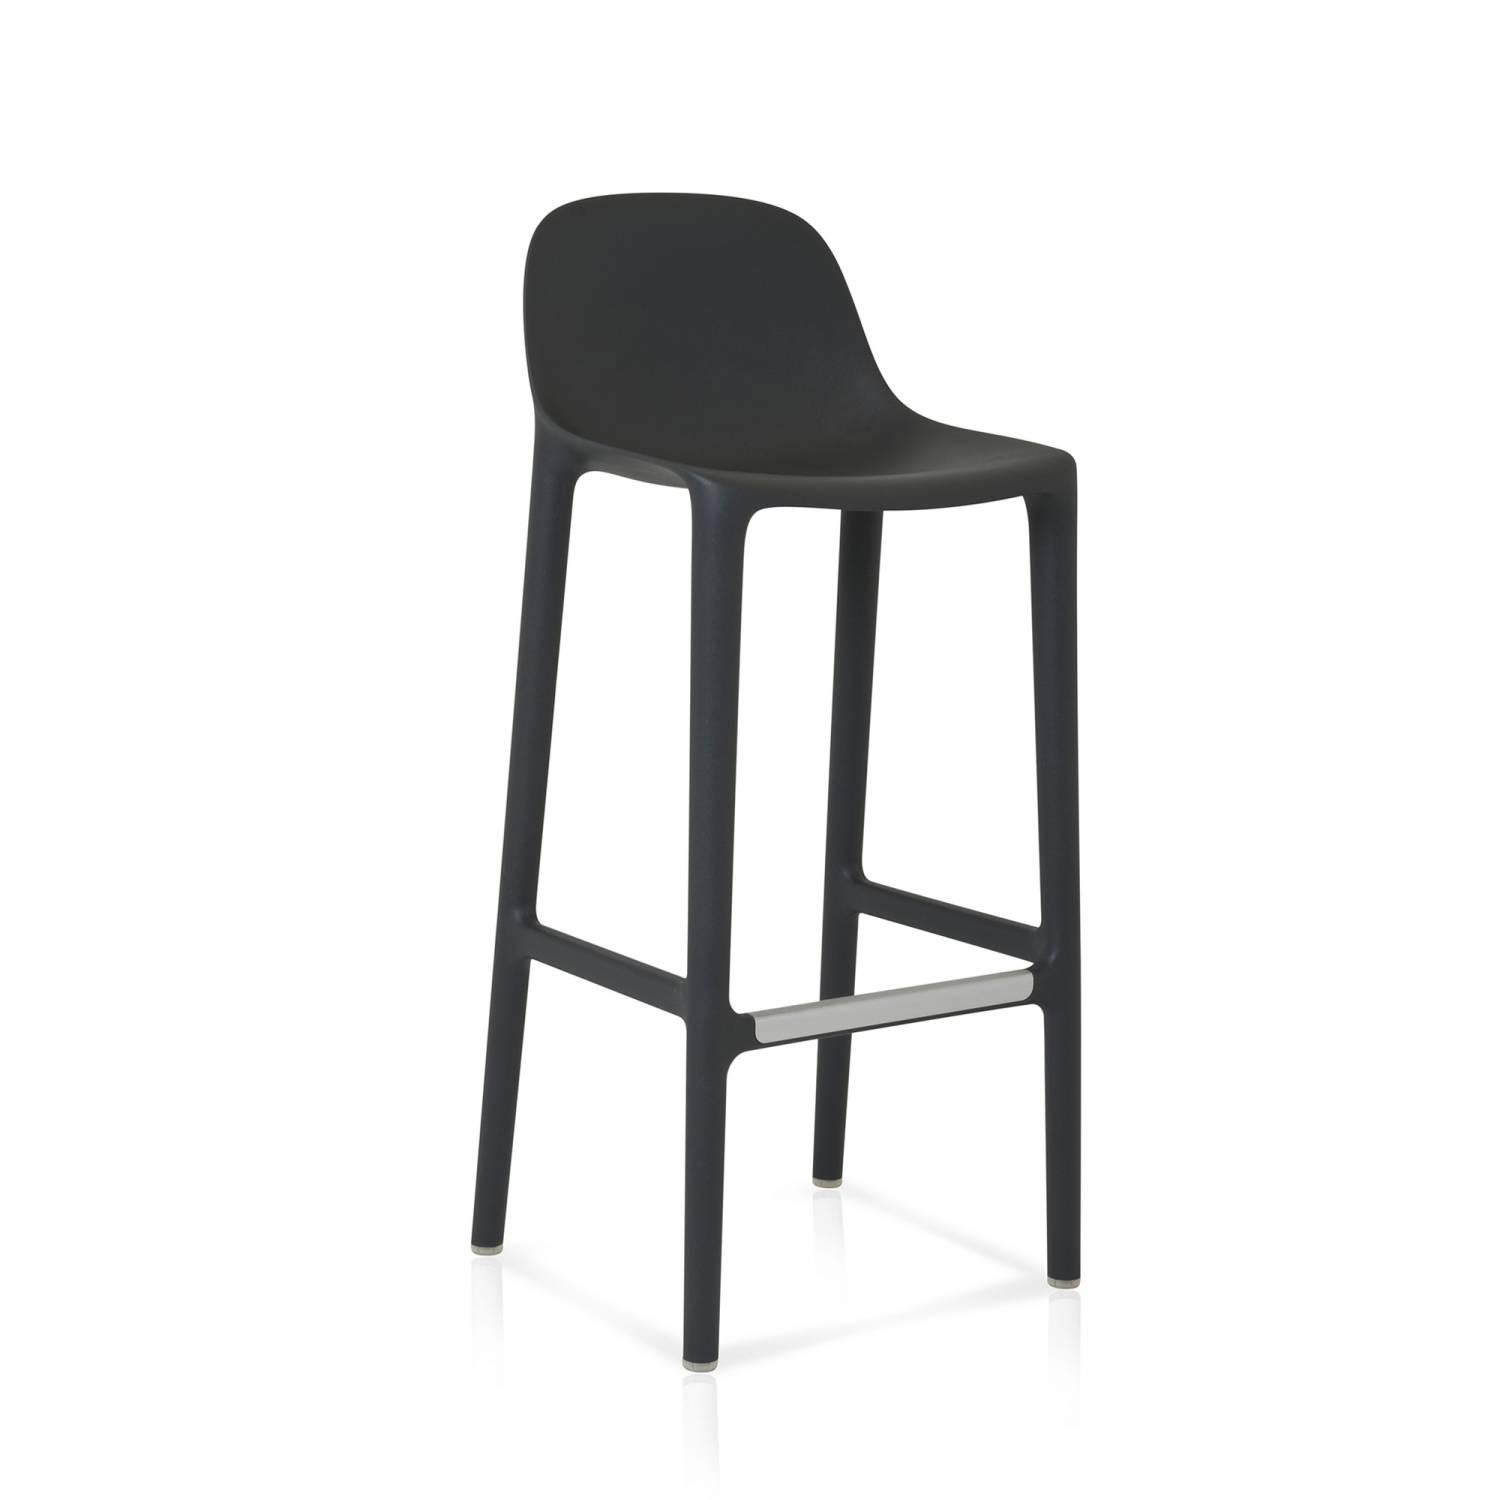 Philippe Starck and Emeco came together to create a new chair that is reclaimed, repurposed, recyclable – and designed to last. The chair is made from 75% waste polypropylene and 15% reclaimed wood that would normally be swept into the trash,